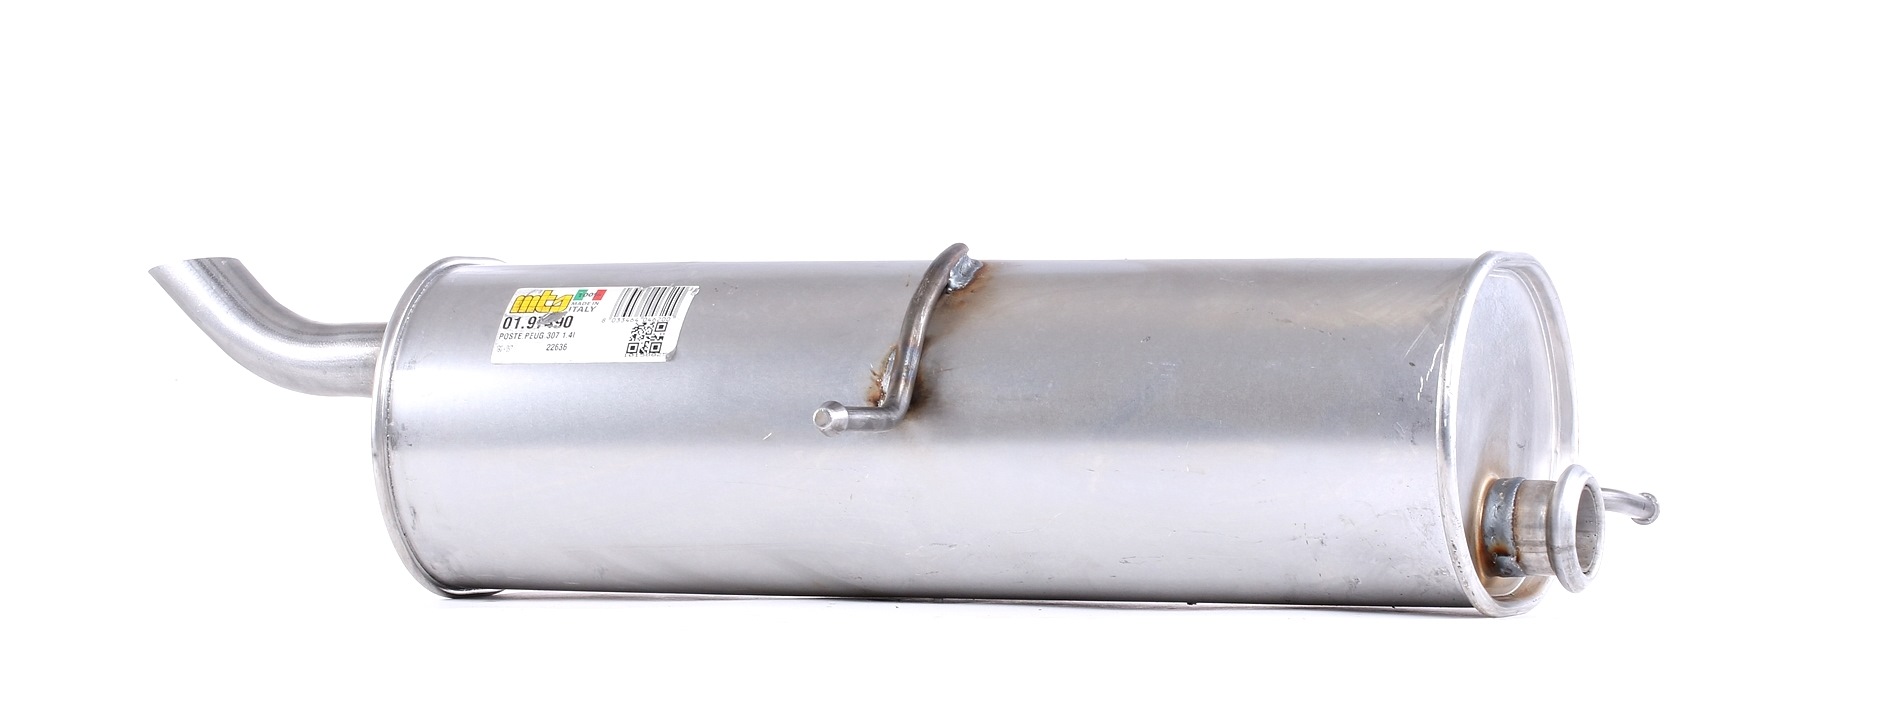 original PEUGEOT 309 Box Body / Hatchback (10S, 3S) Exhaust silencer sports and universal MTS 01.97490